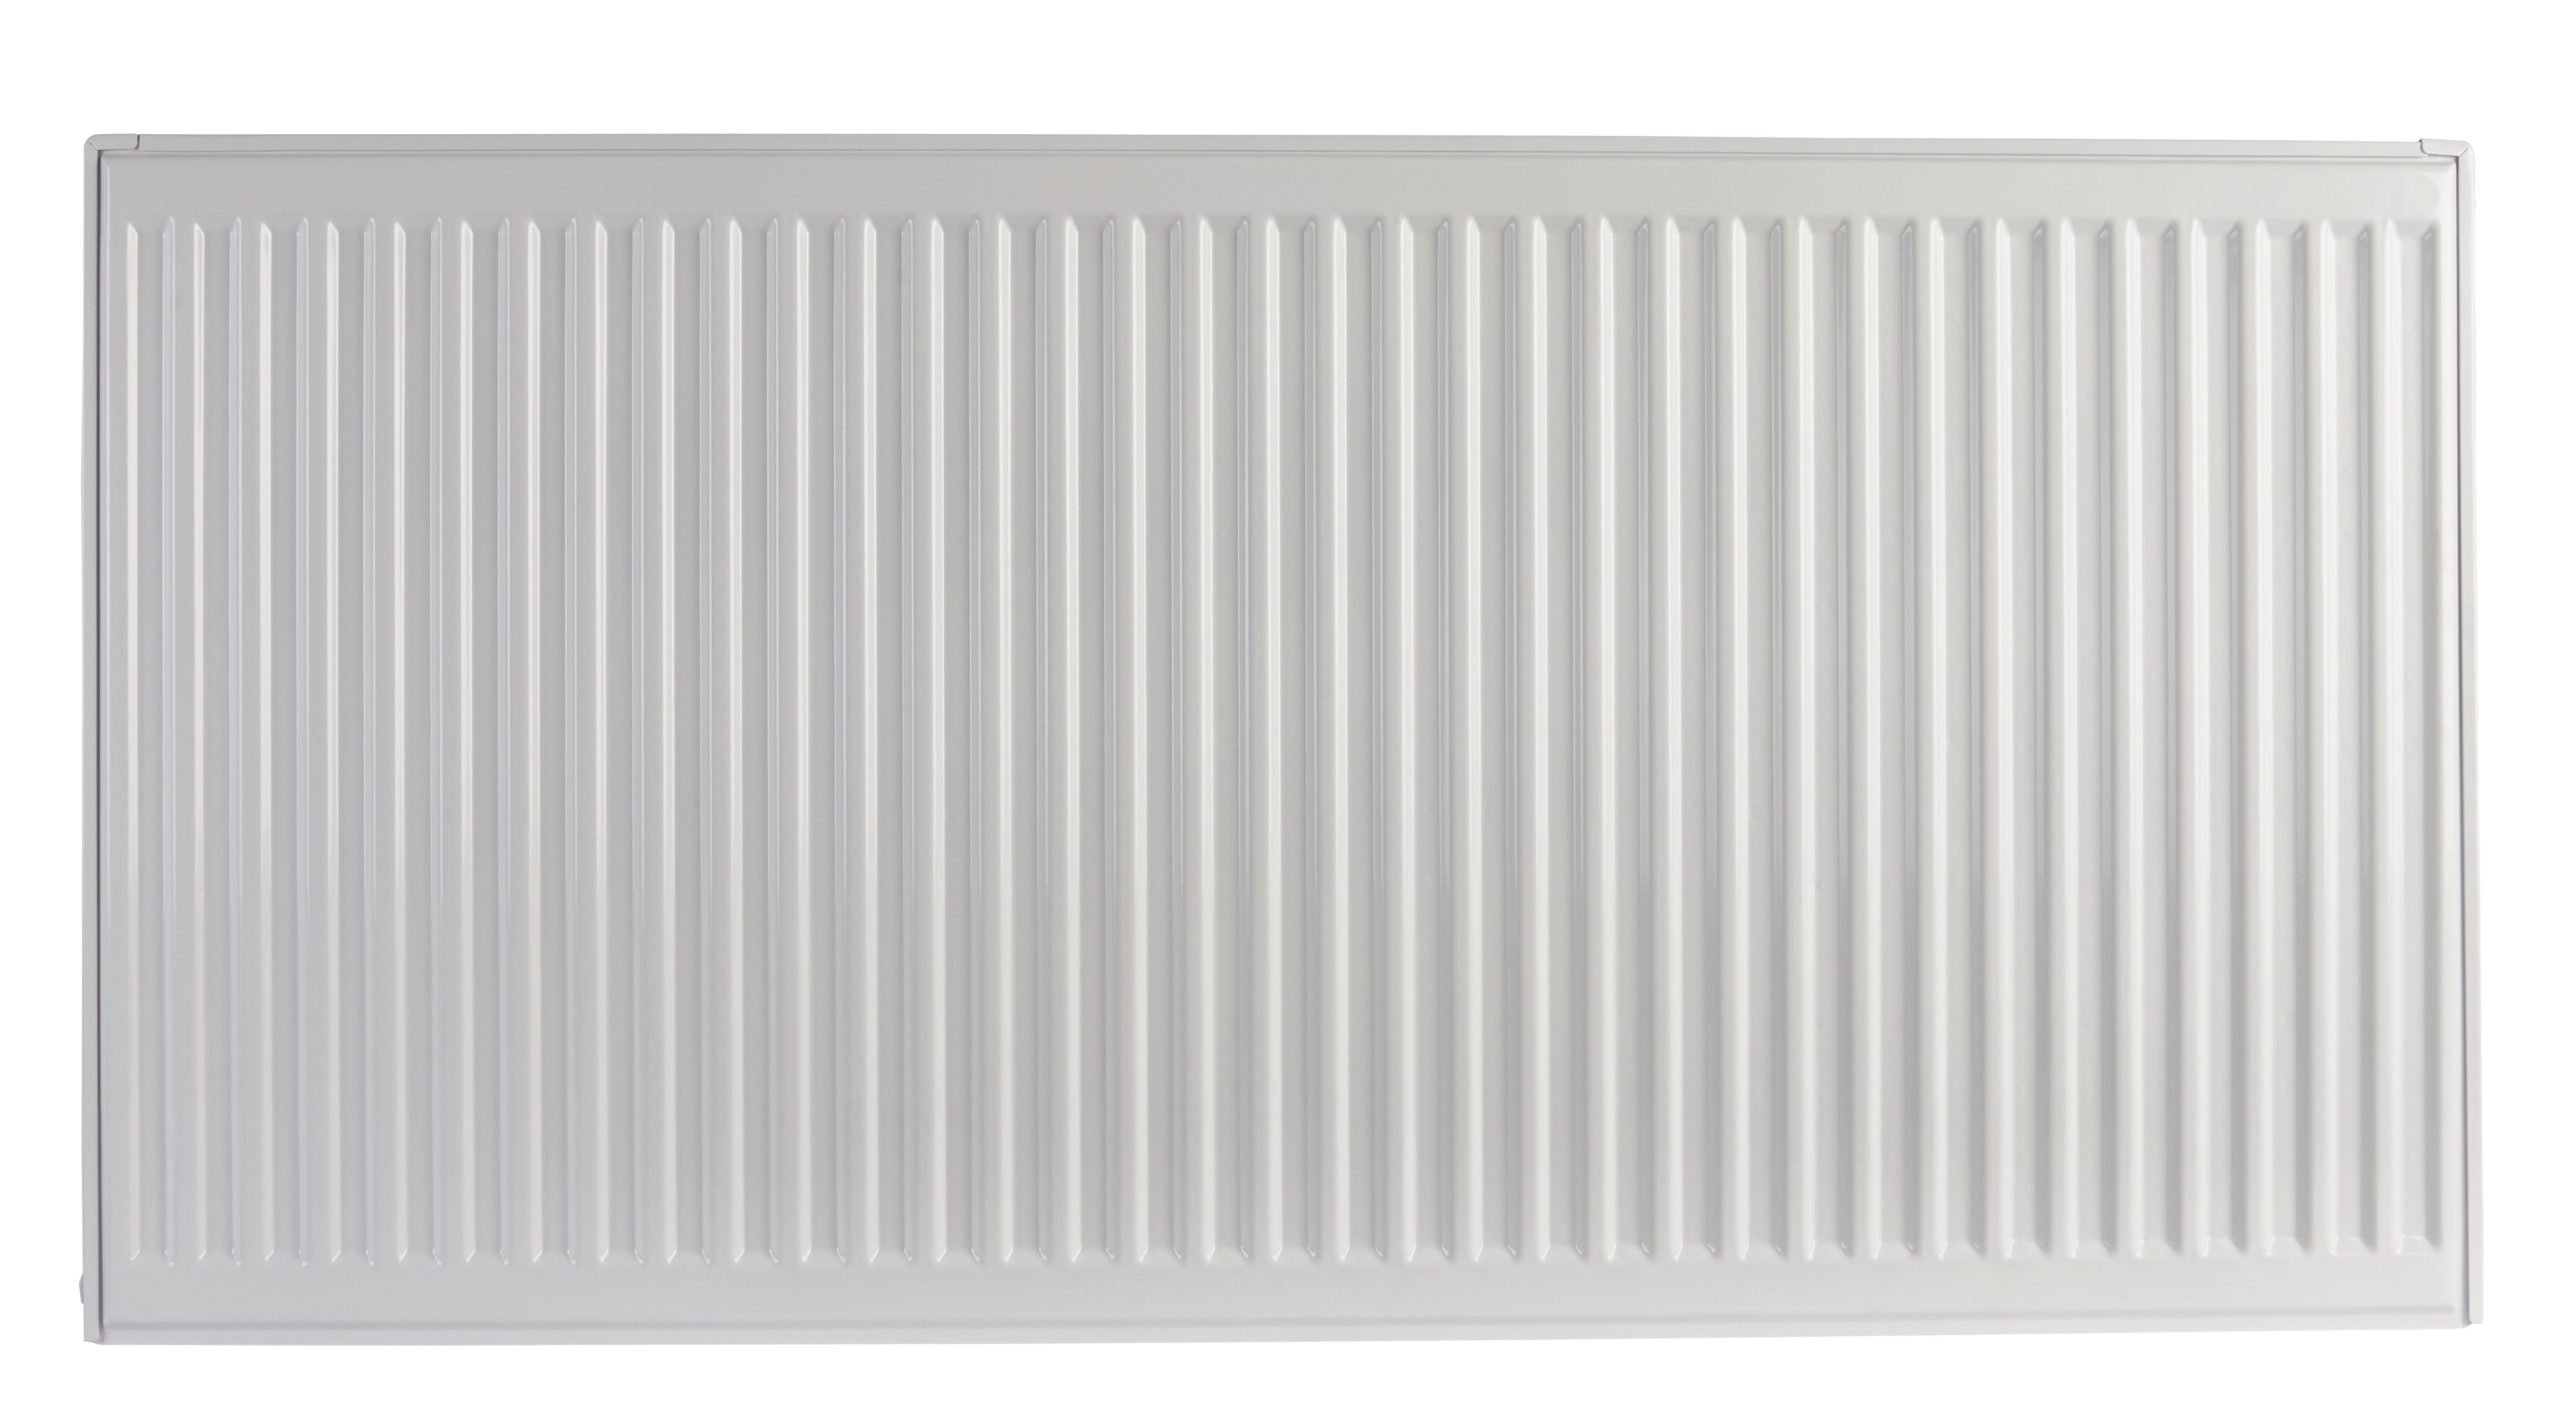 Homeline by Stelrad 700 x 1200mm Type 21 Double Panel Plus Single Convector Radiator